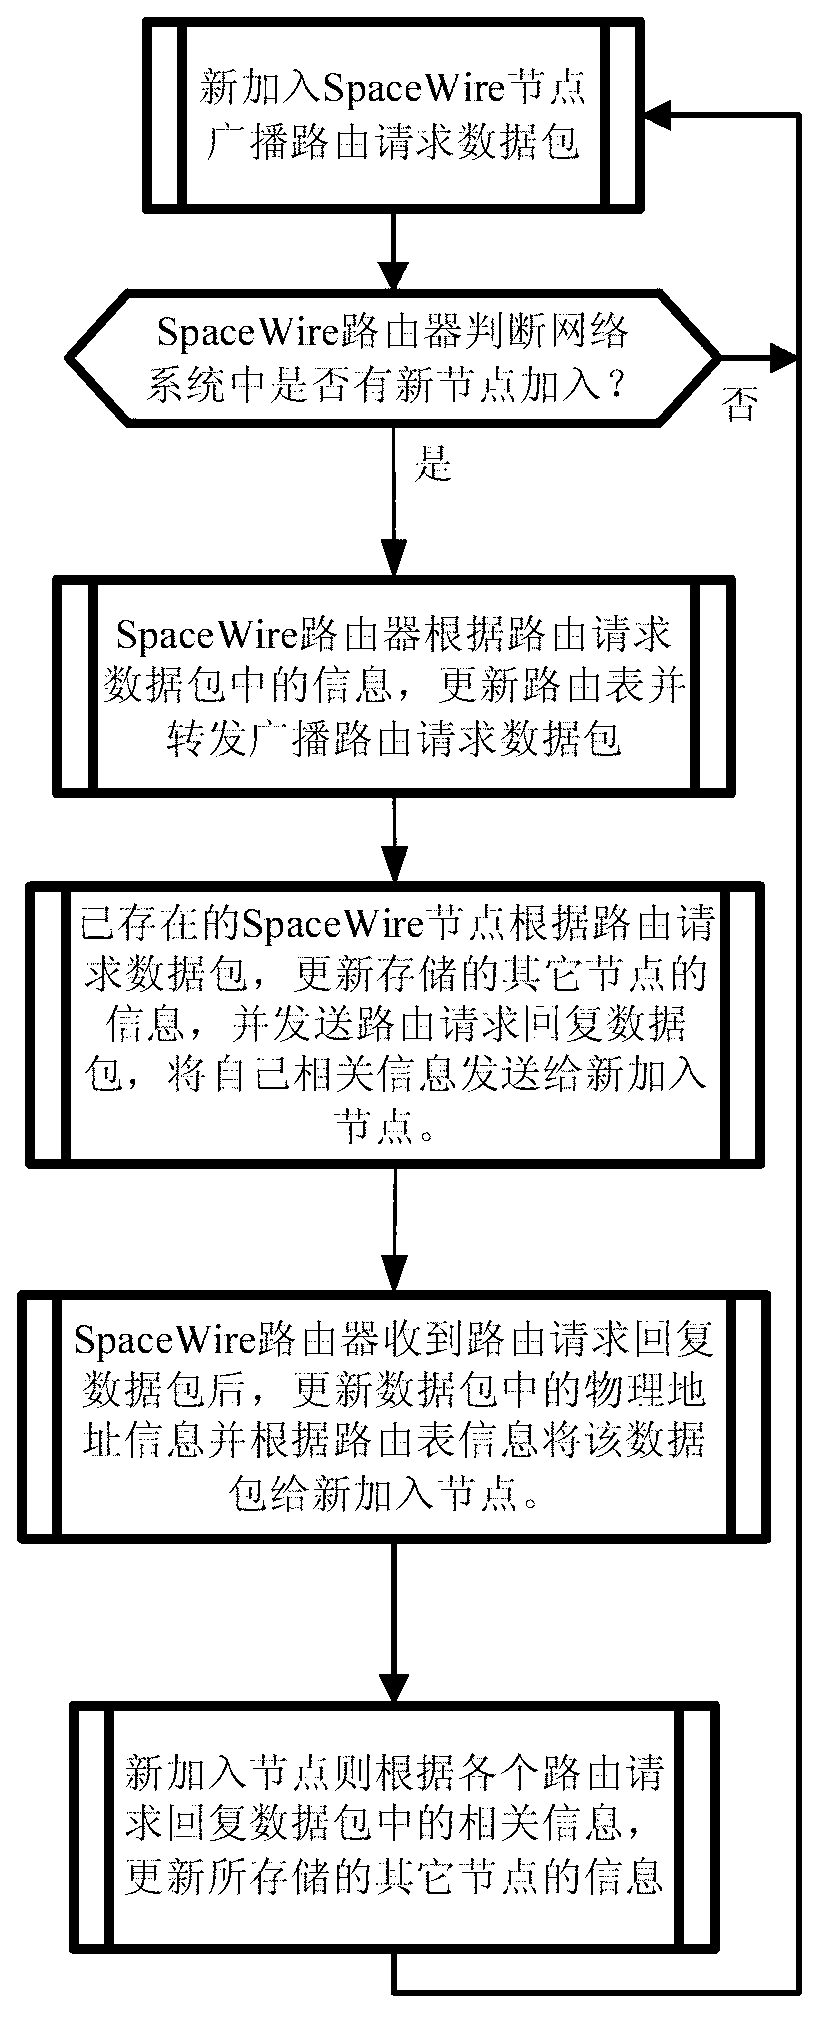 SpaceWire dynamic route implementing method